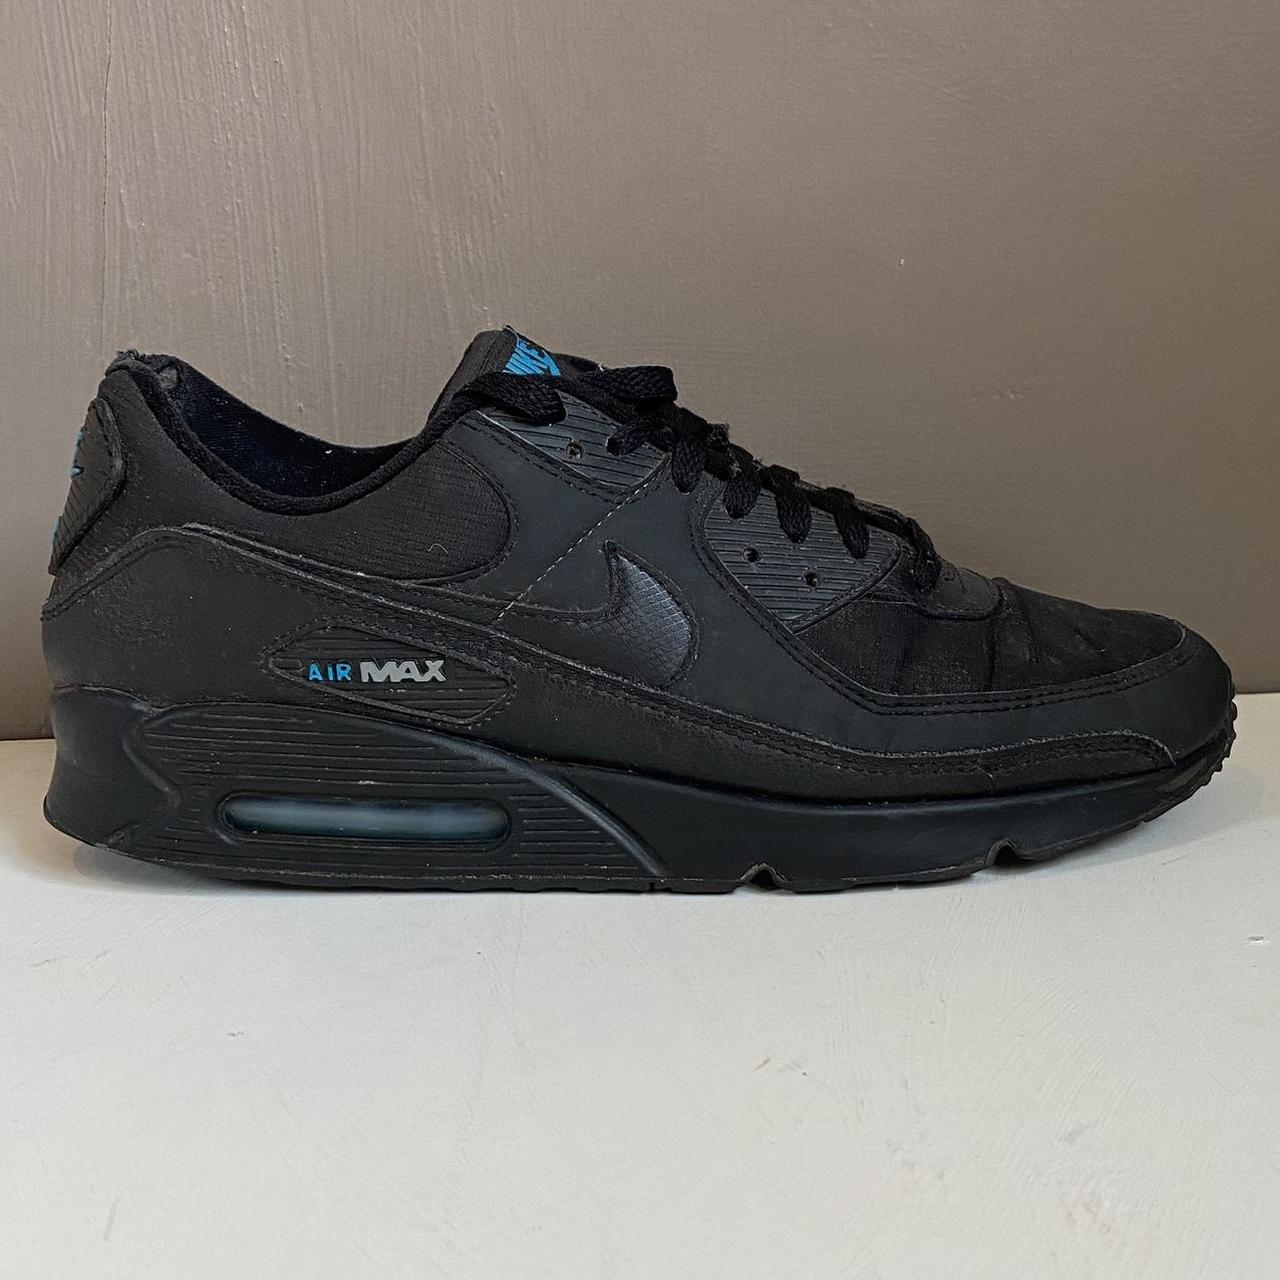 Nike Men's Black and Blue Trainers | Depop